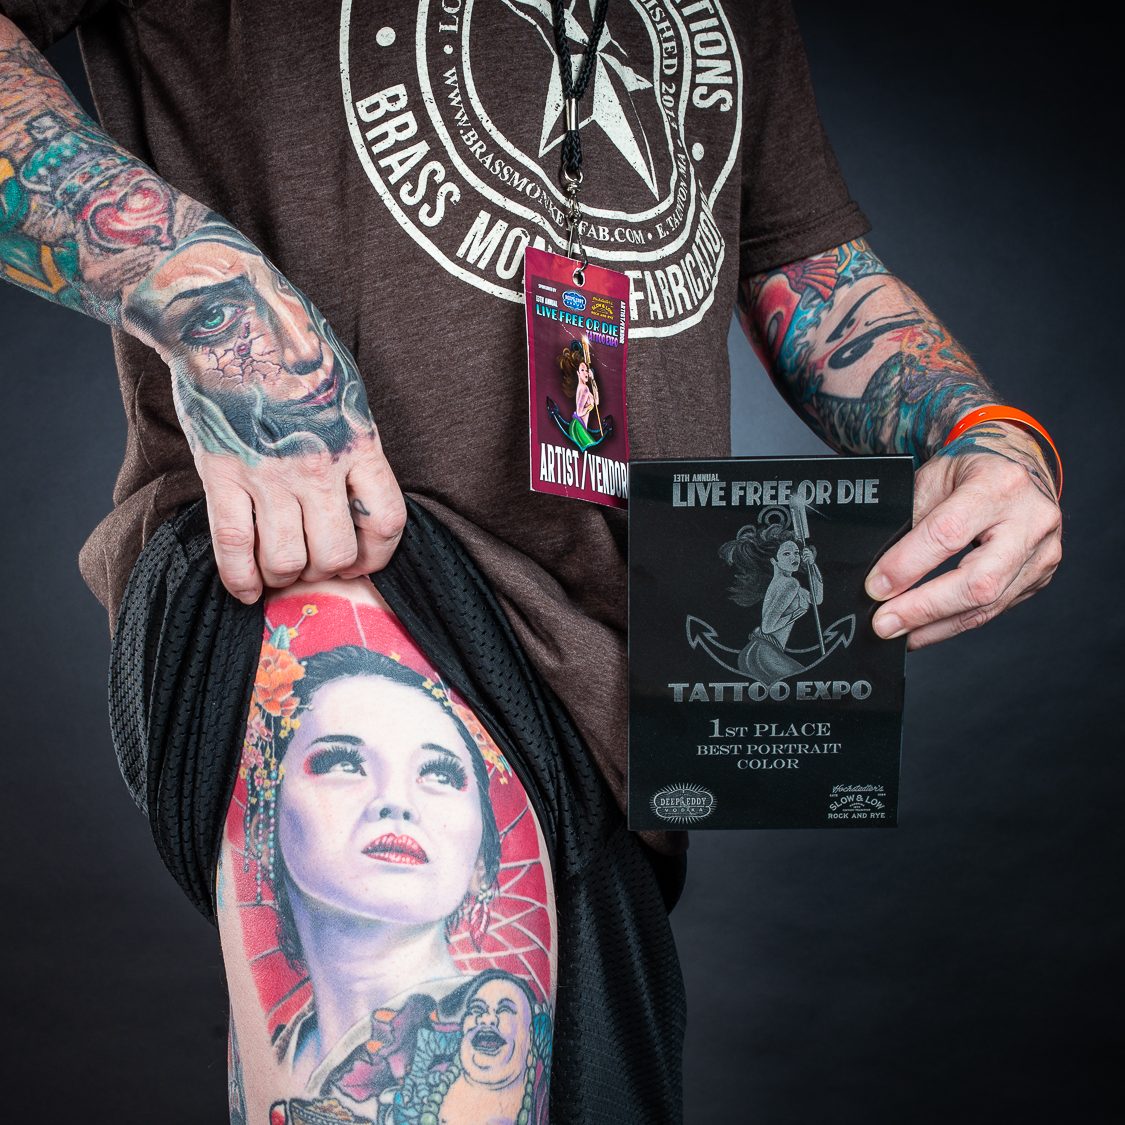 Photo of a man showing their leg tattoo and contest award